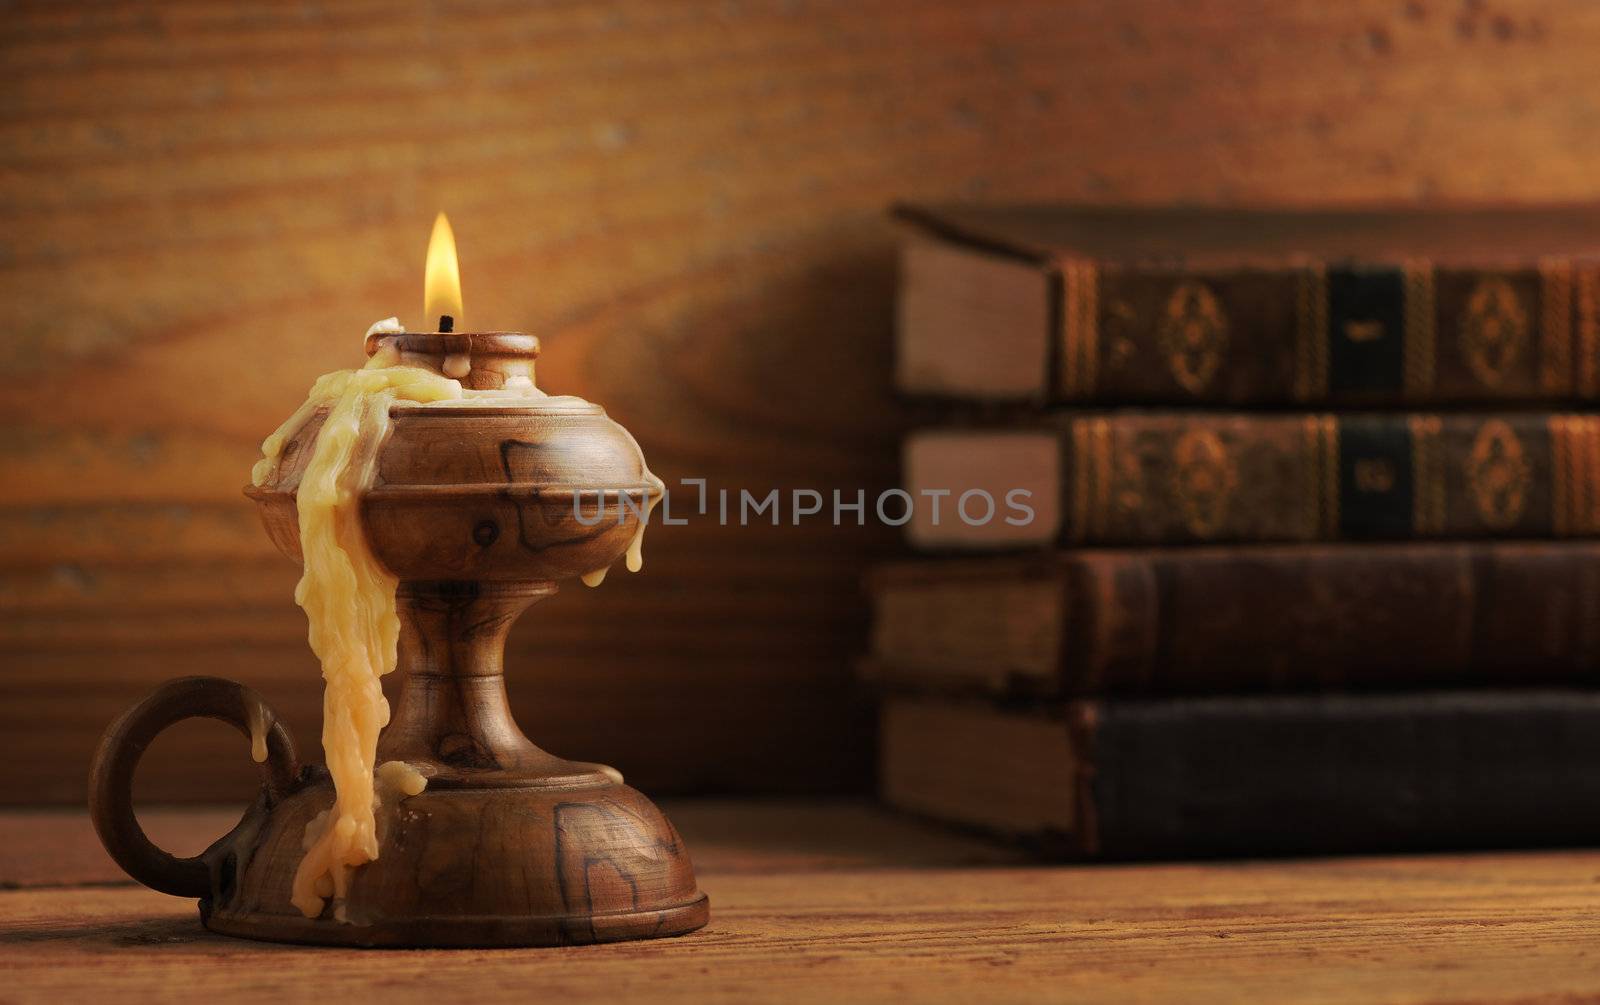 old candle on a wooden table, old books in the background